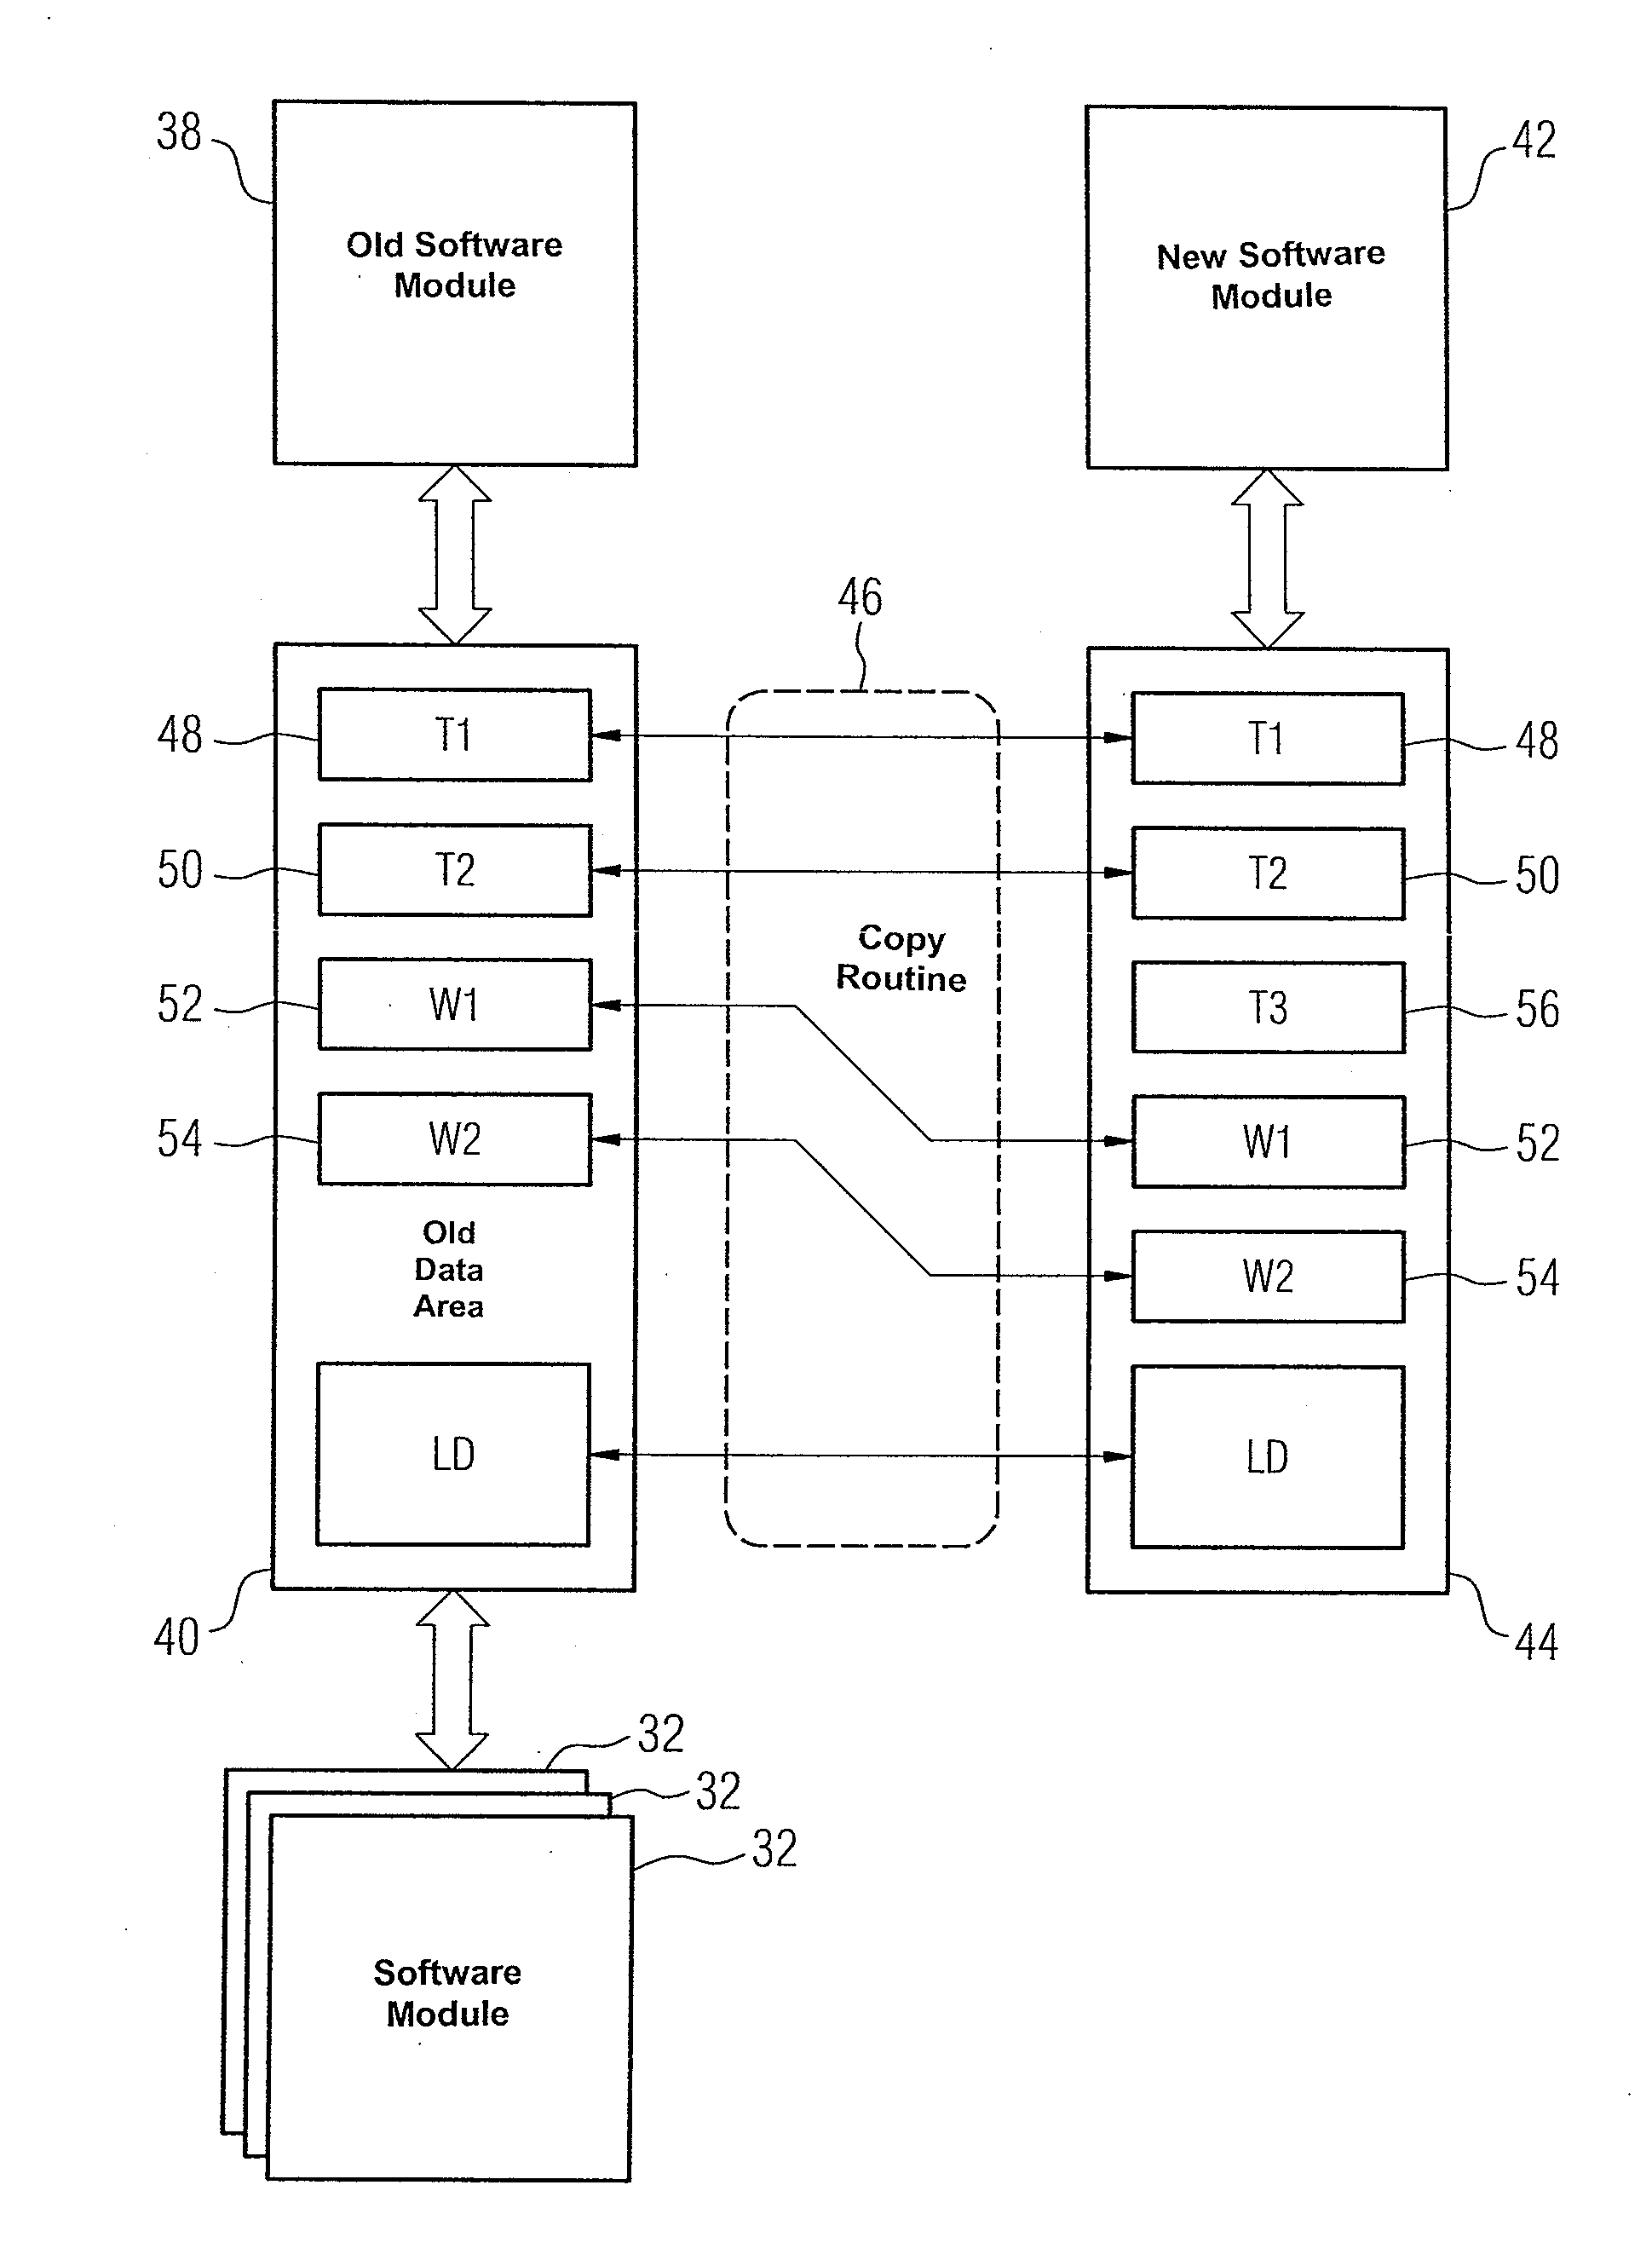 Method for Operating an Automation System